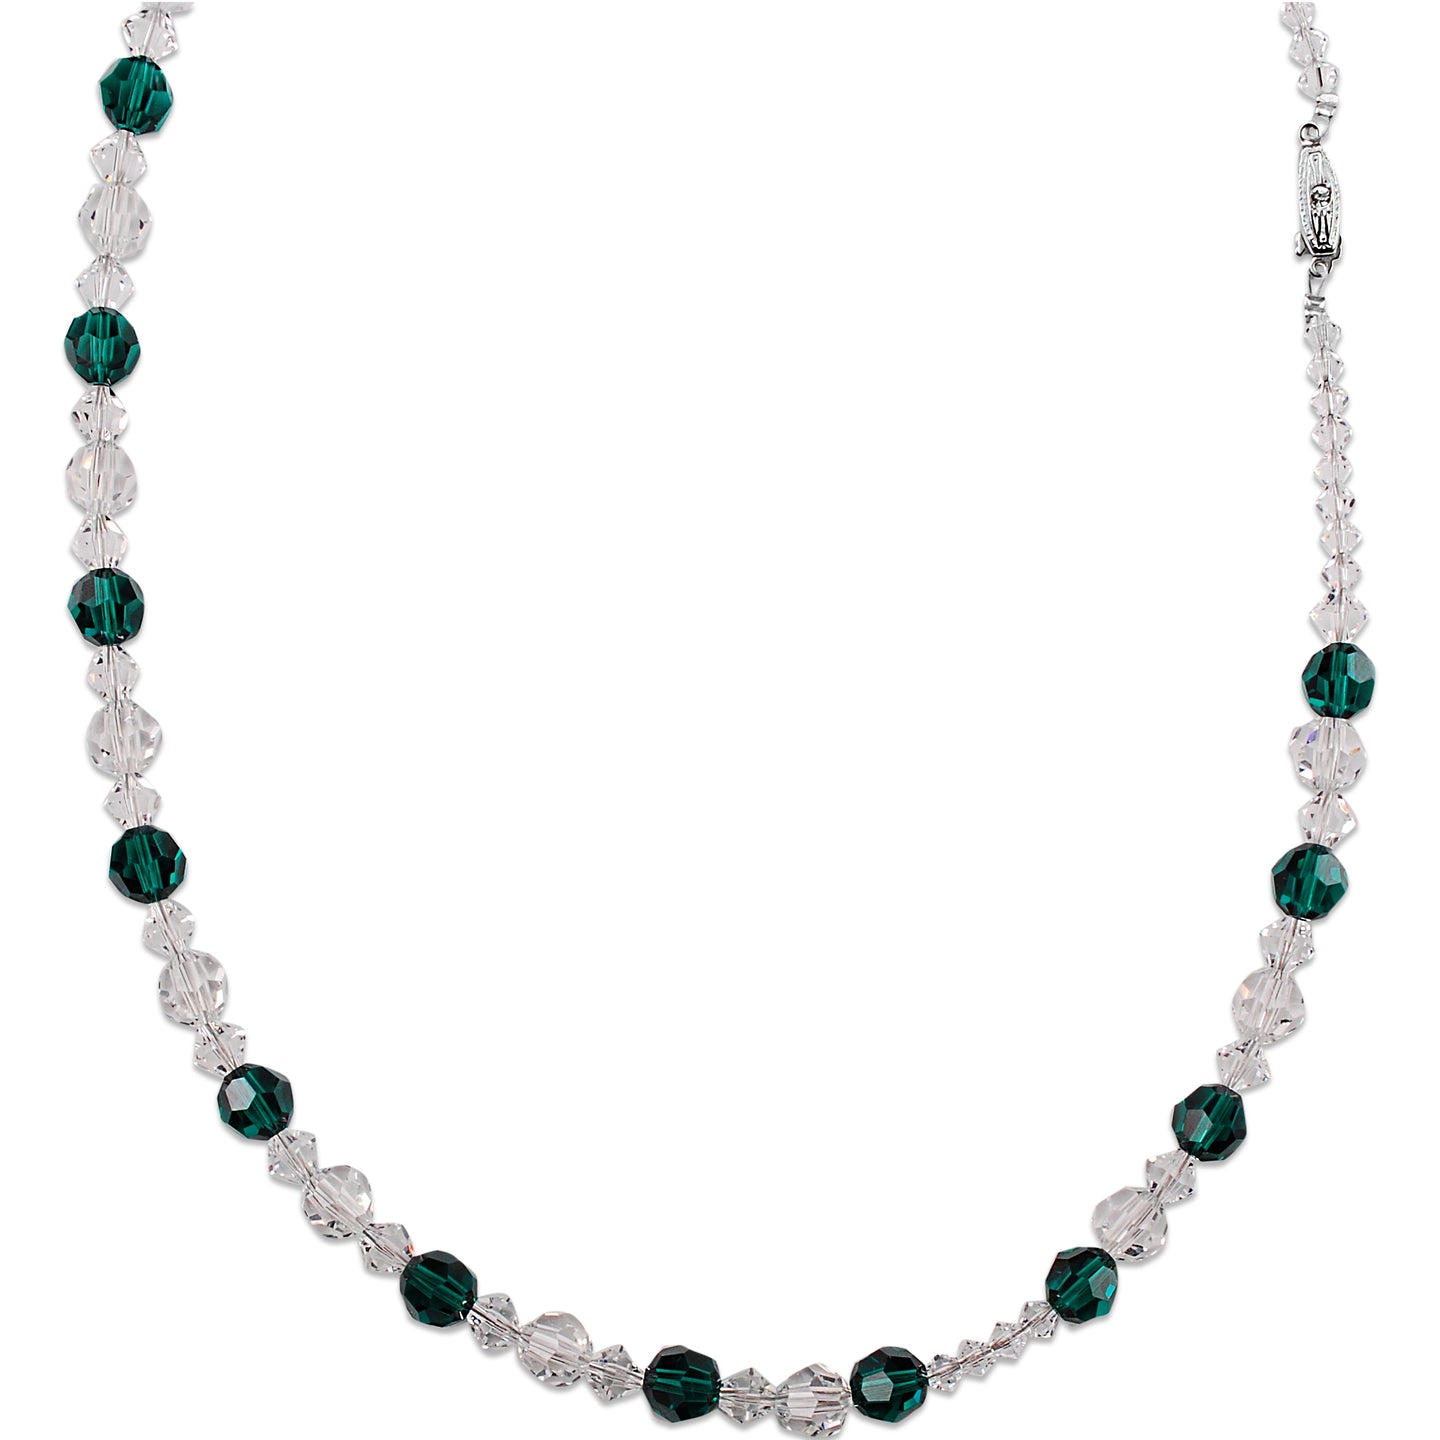 Crystal and Emerald Beaded Necklace (Long)